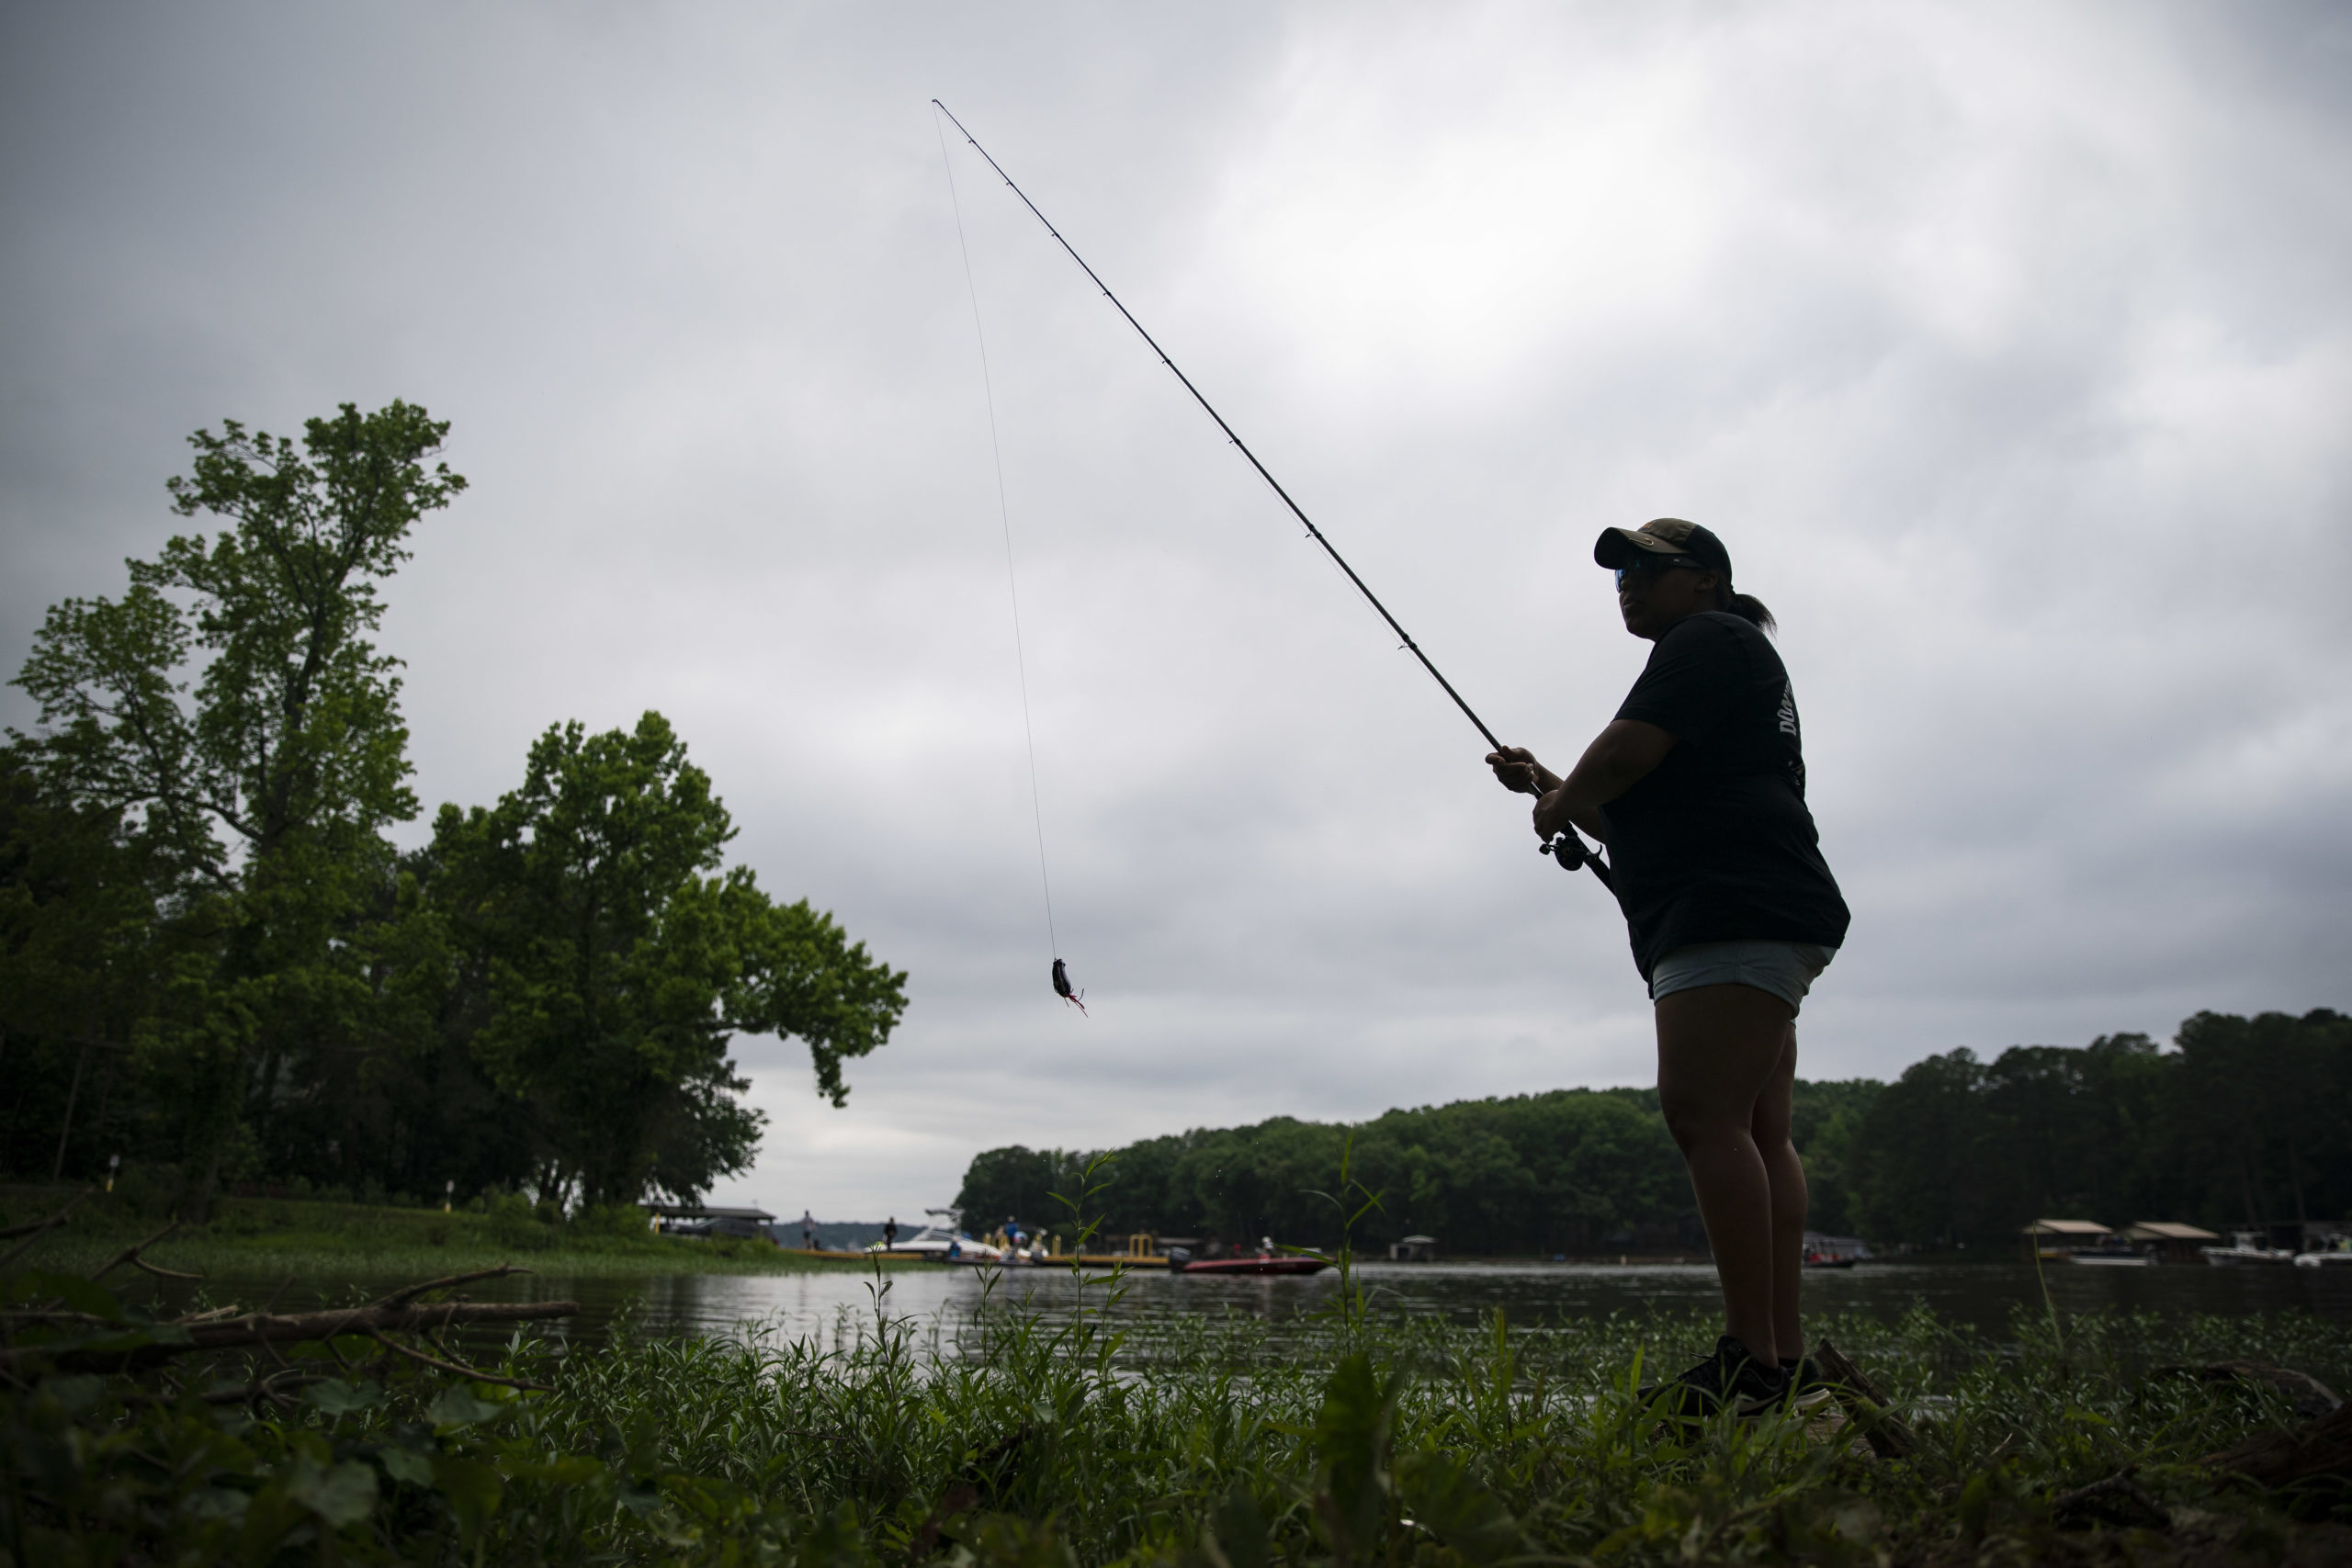 MOUNT GILEAD, NC - MAY 25: A woman fishes on Lake Tillery near the Lilly's Bridge Marina on Memorial Day, May 25, 2020 in Mount Gilead, North Carolina. Despite overcast skies, locals did not miss an opportunity to head outdoors on the first weekend of the state's Phase 2 reopening during the ongoing coronavirus pandemic. (Photo by Al Drago/Getty Images)